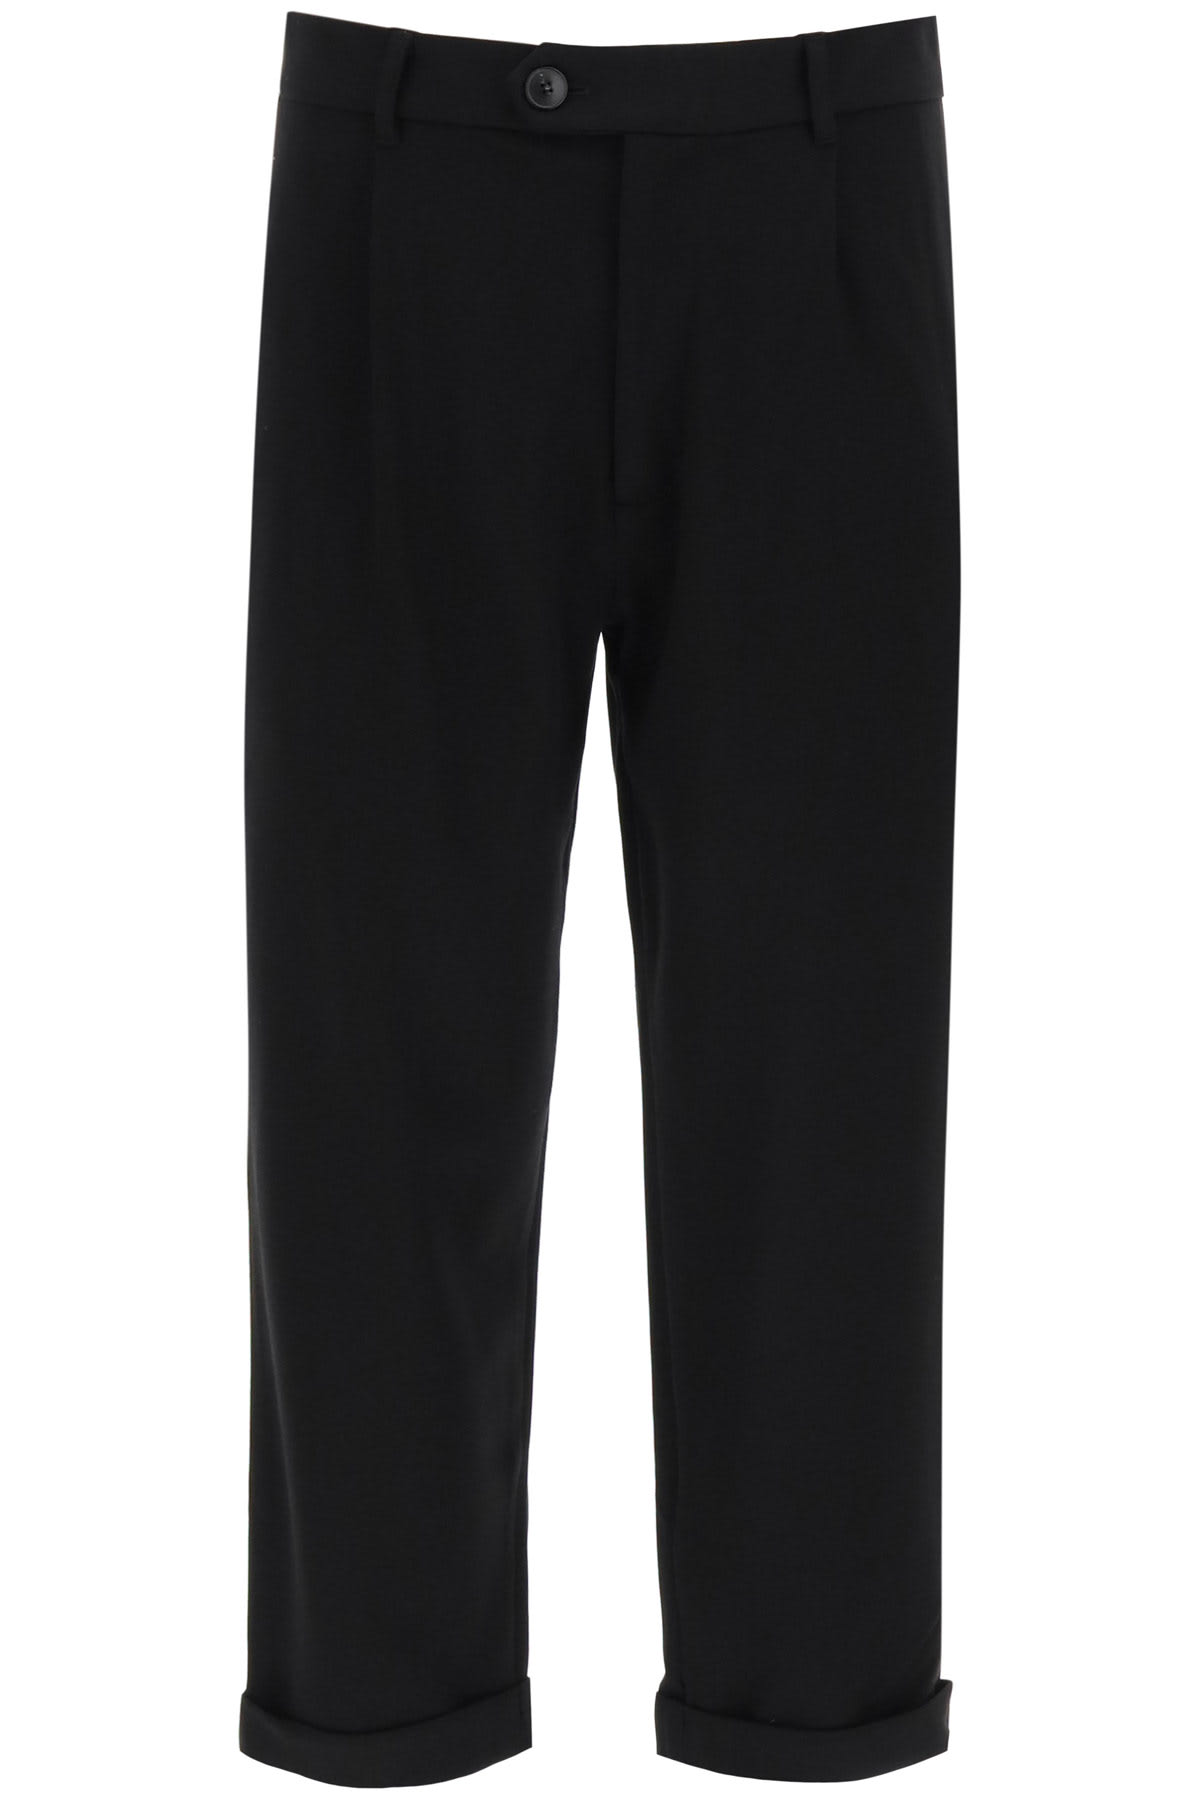 Silted Dave Milan Carrot Fit Trousers